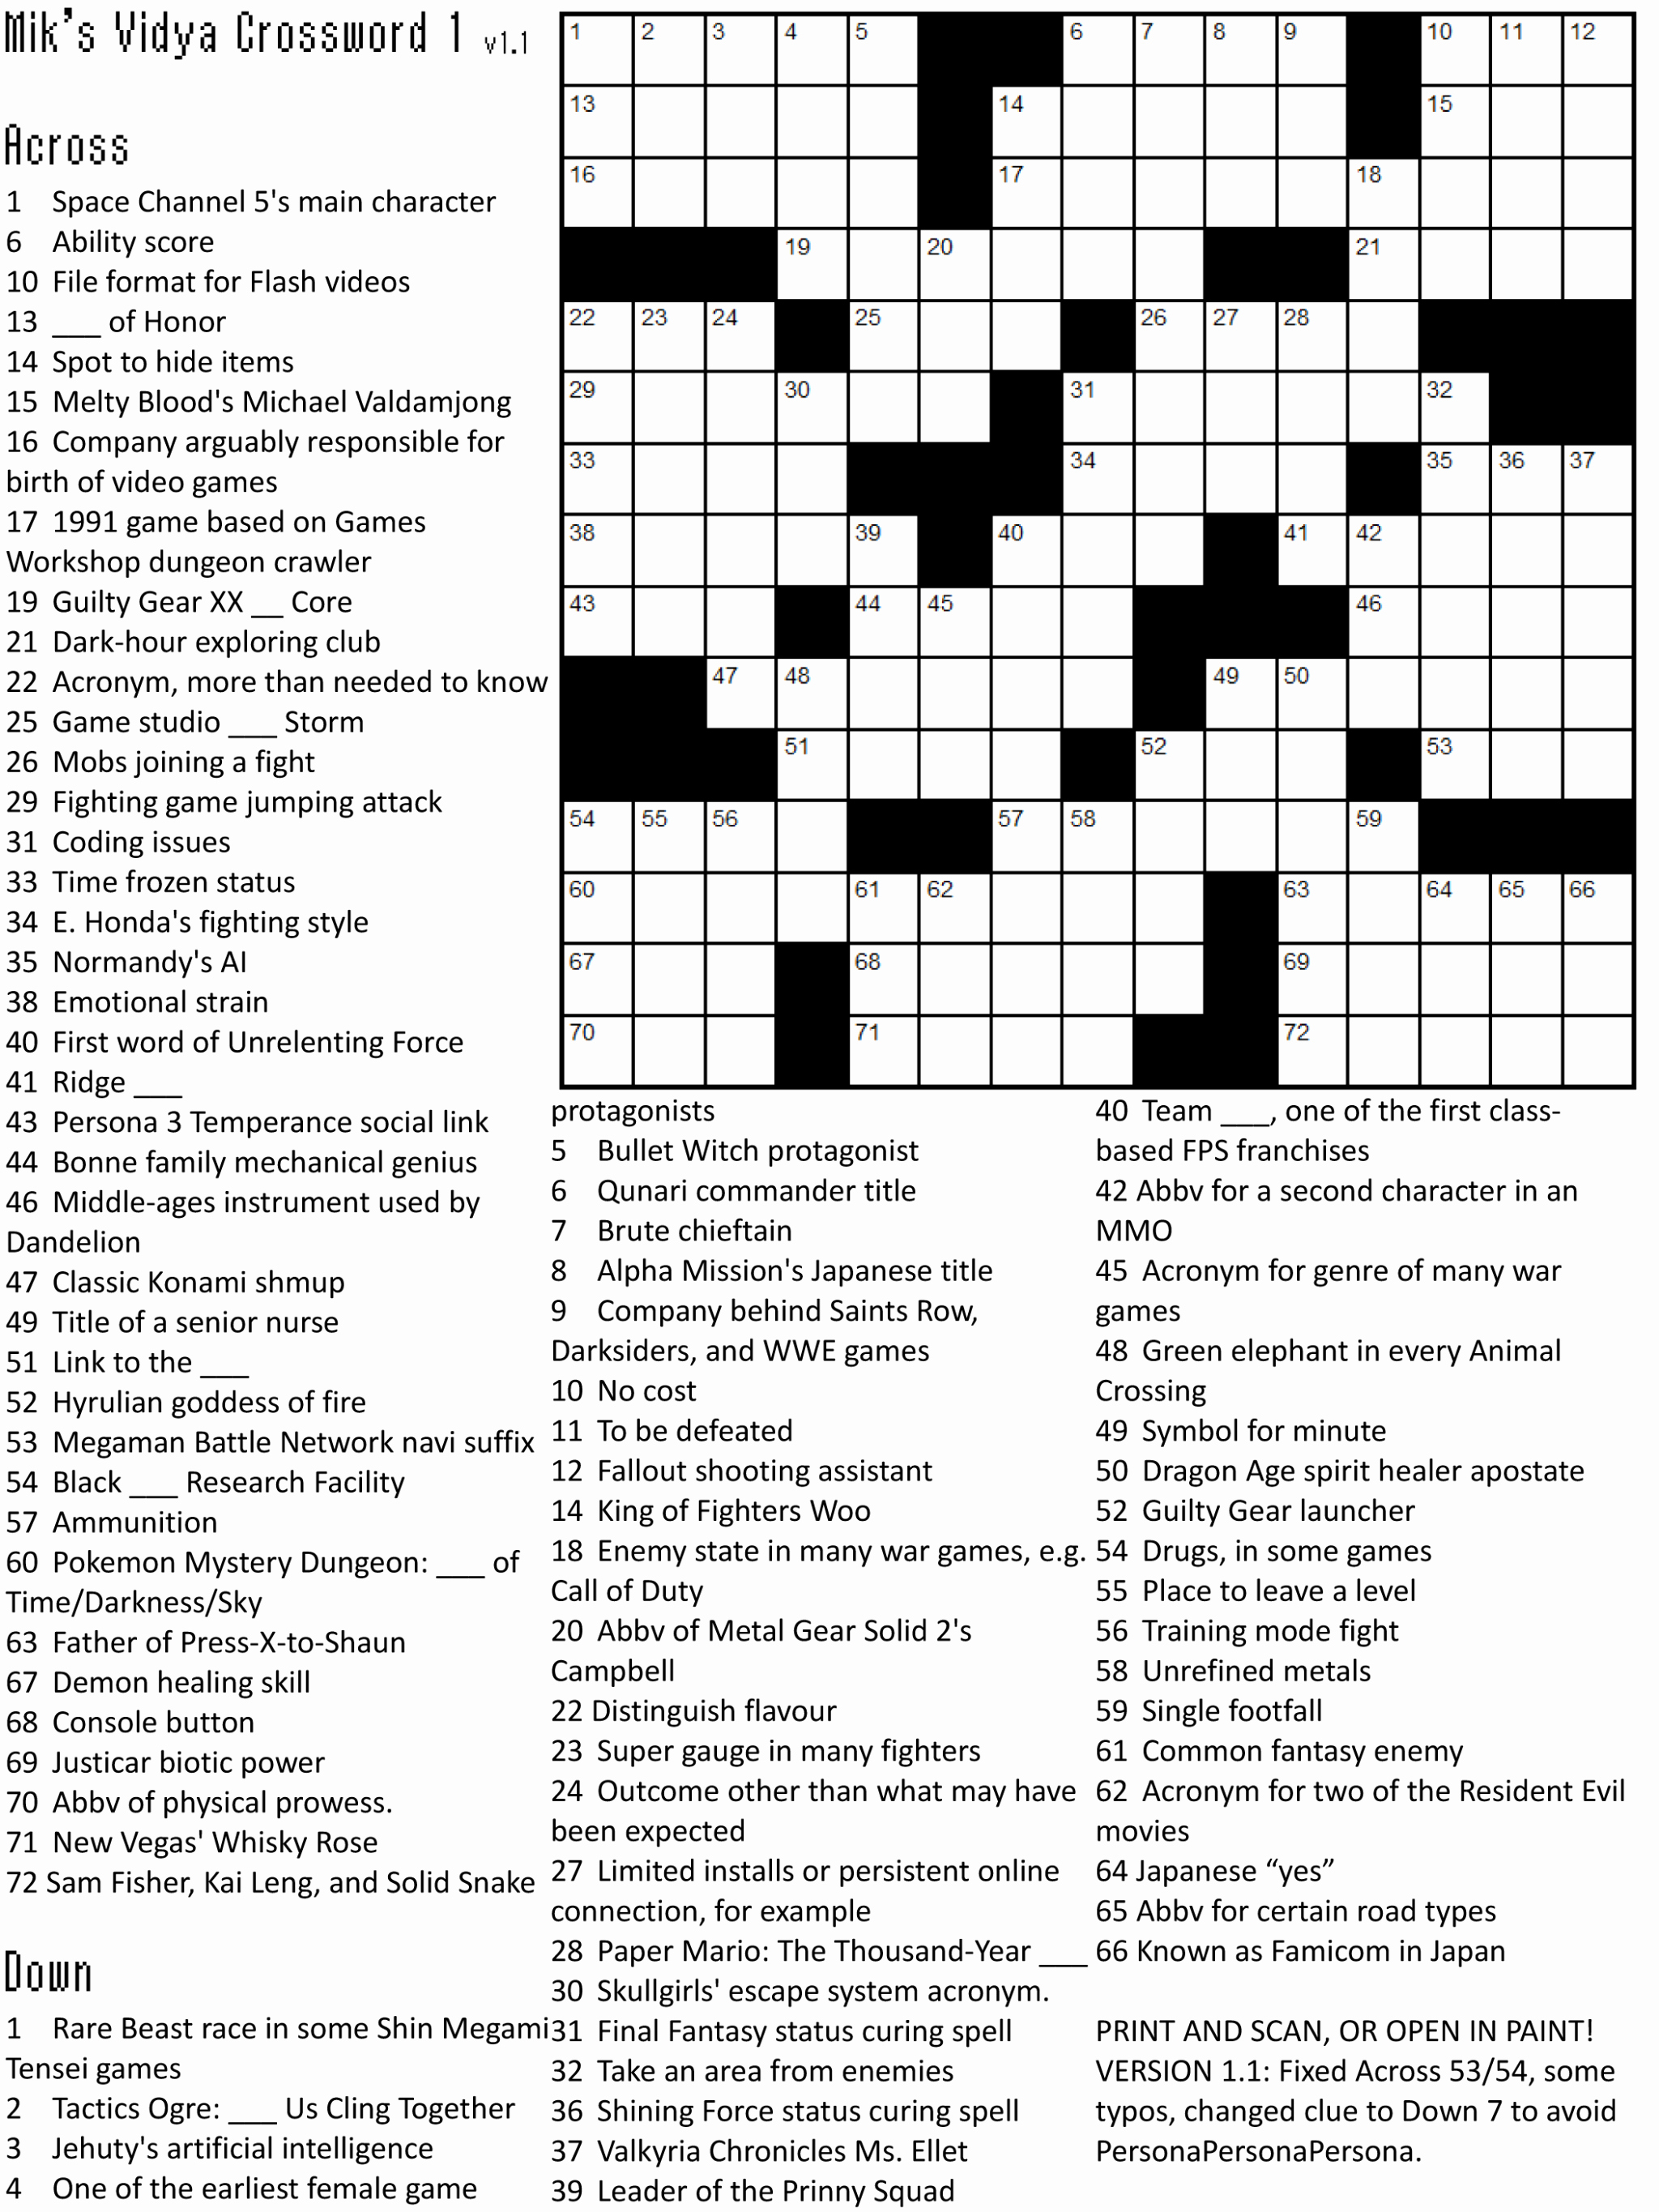 Printable Crossword Puzzles For Adults Printable Crossword Puzzles